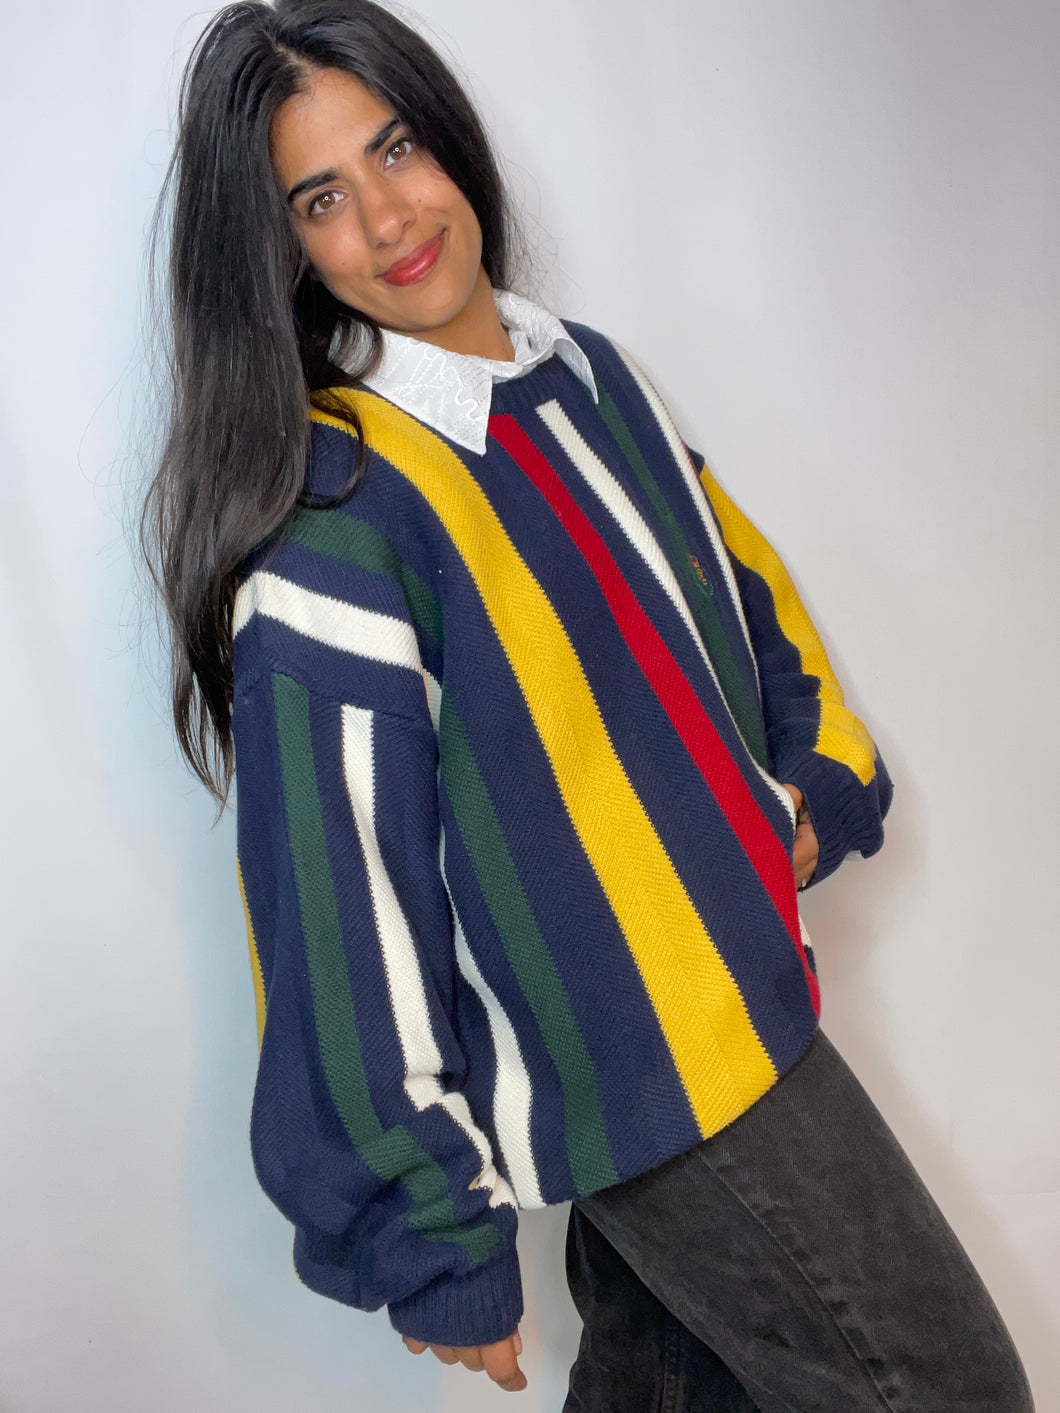 Classic 90s Striped Colorful Pullover by Chaps (M)